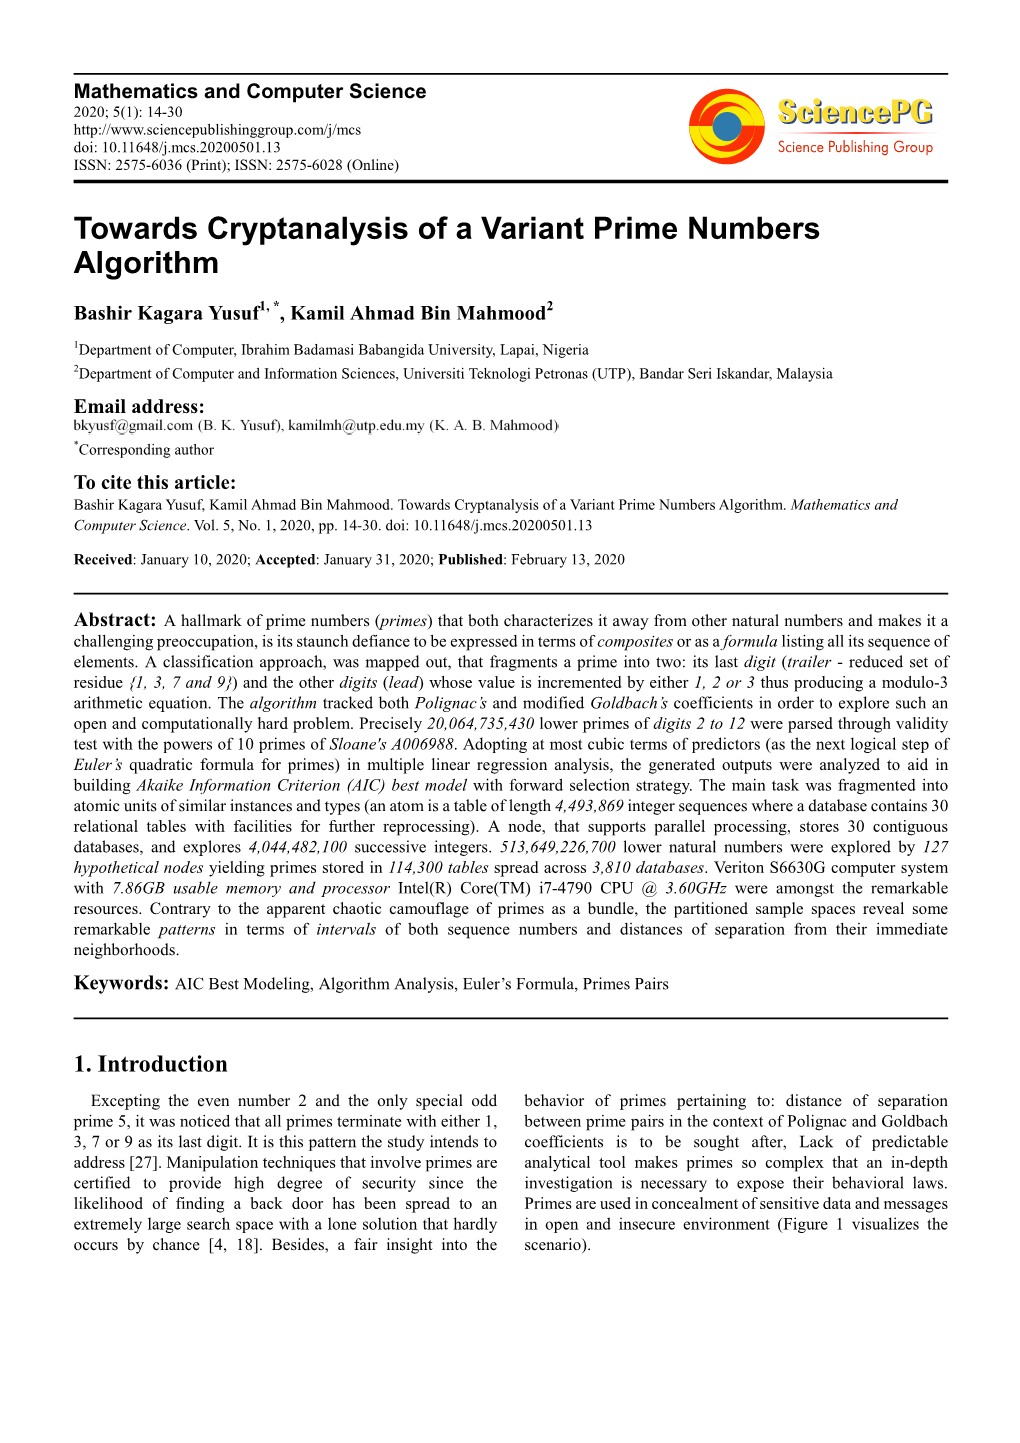 Towards Cryptanalysis of a Variant Prime Numbers Algorithm